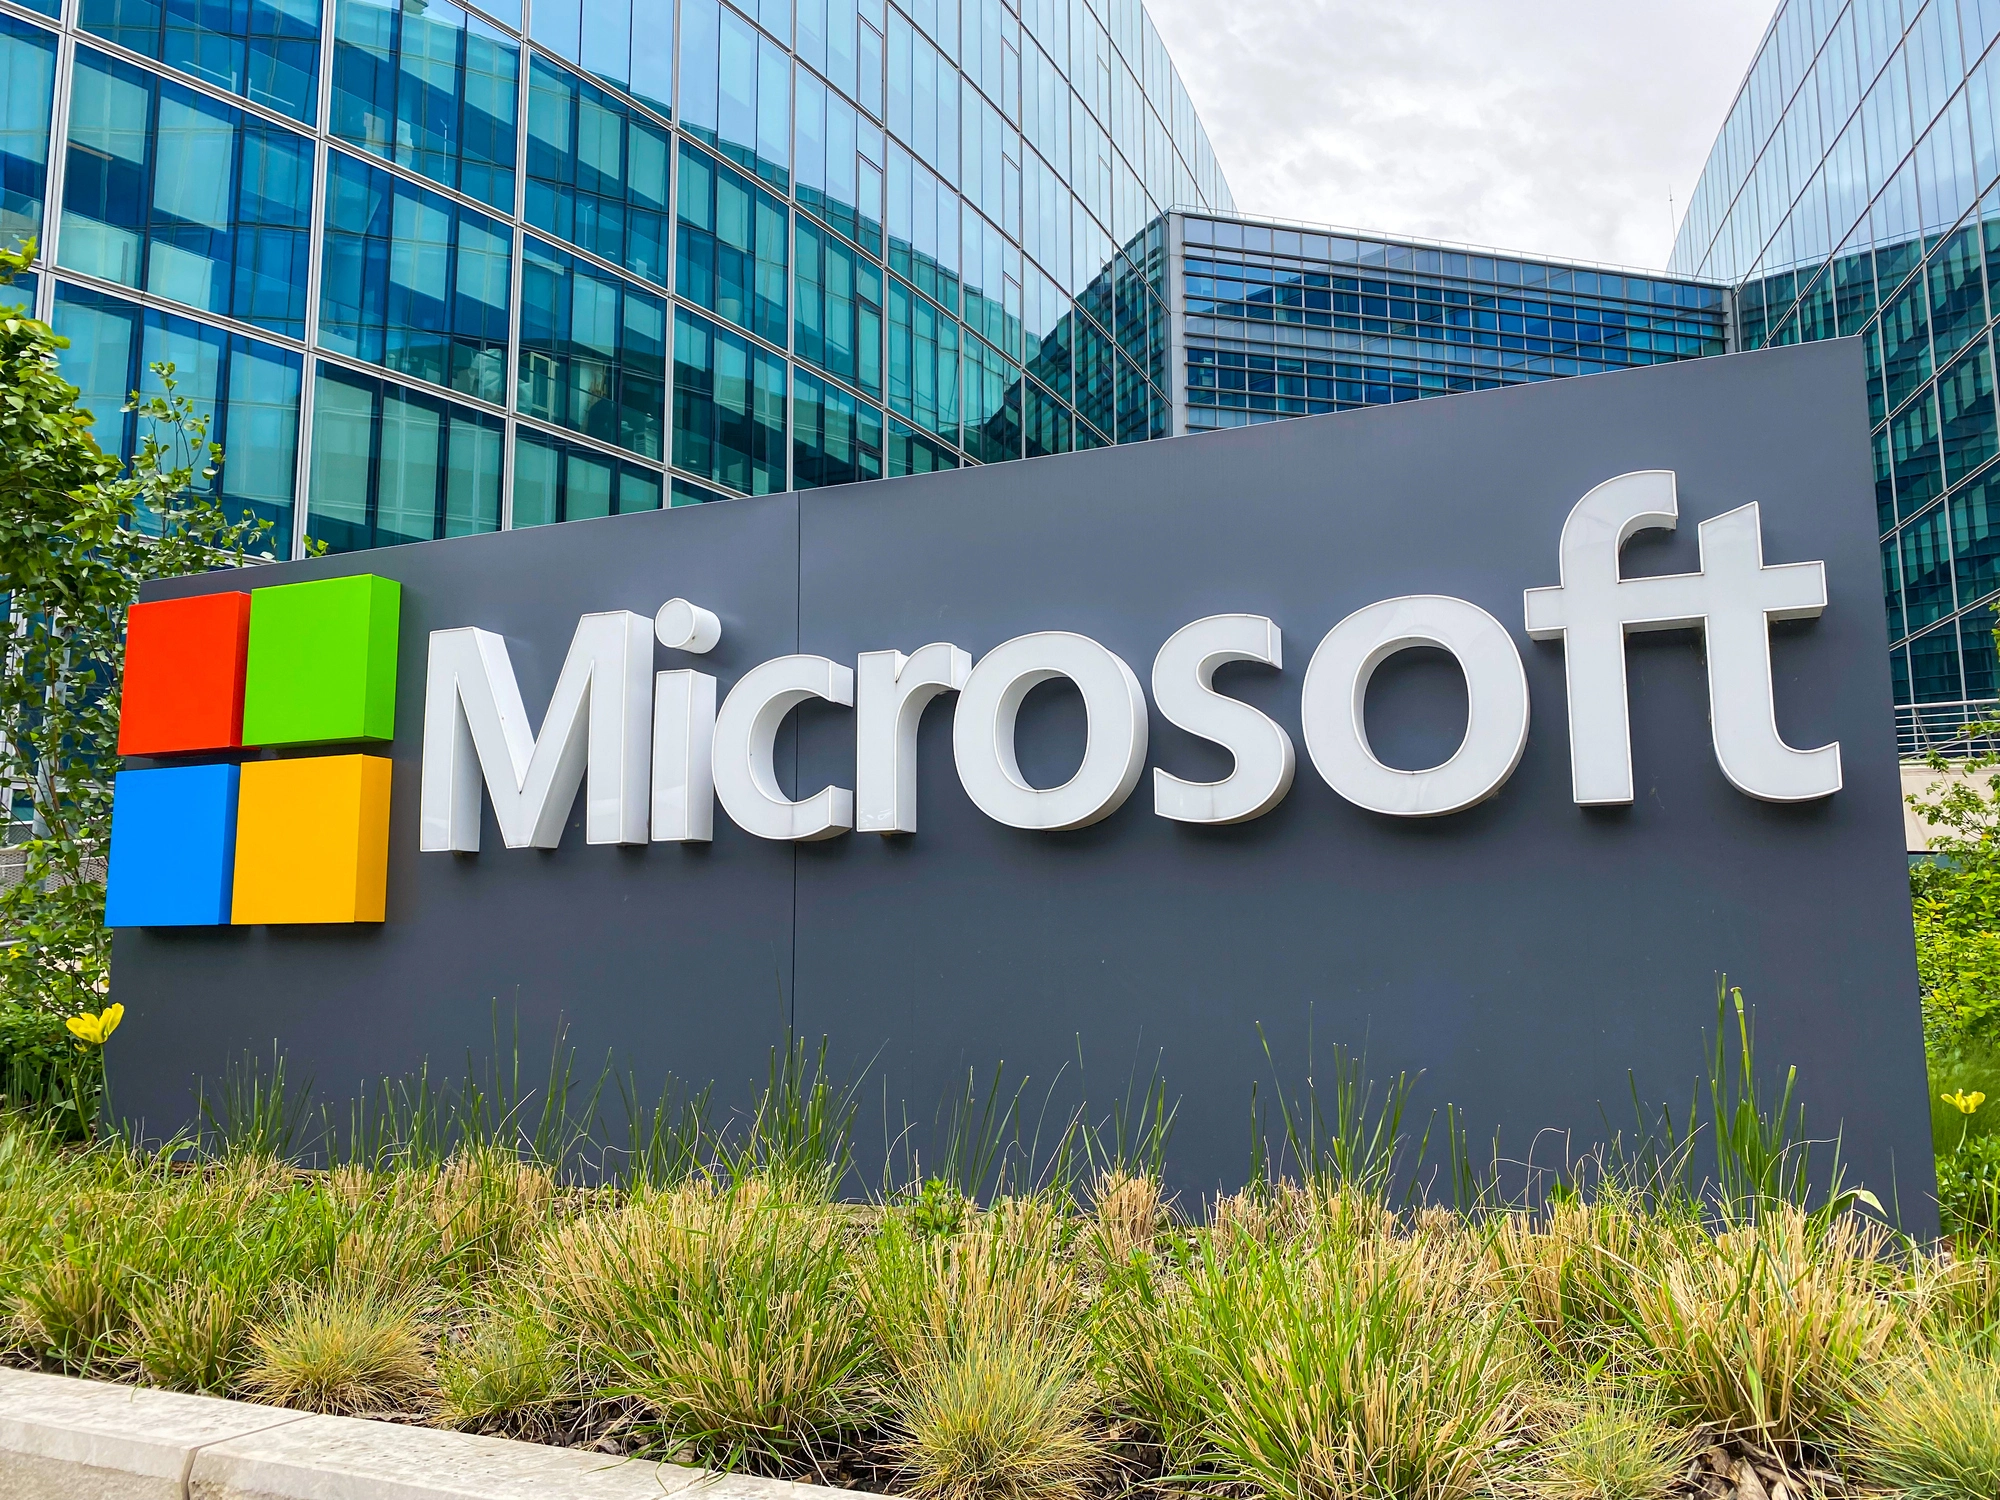 Rectron Expands Its Partnership With Microsoft To The Rest Of SADC